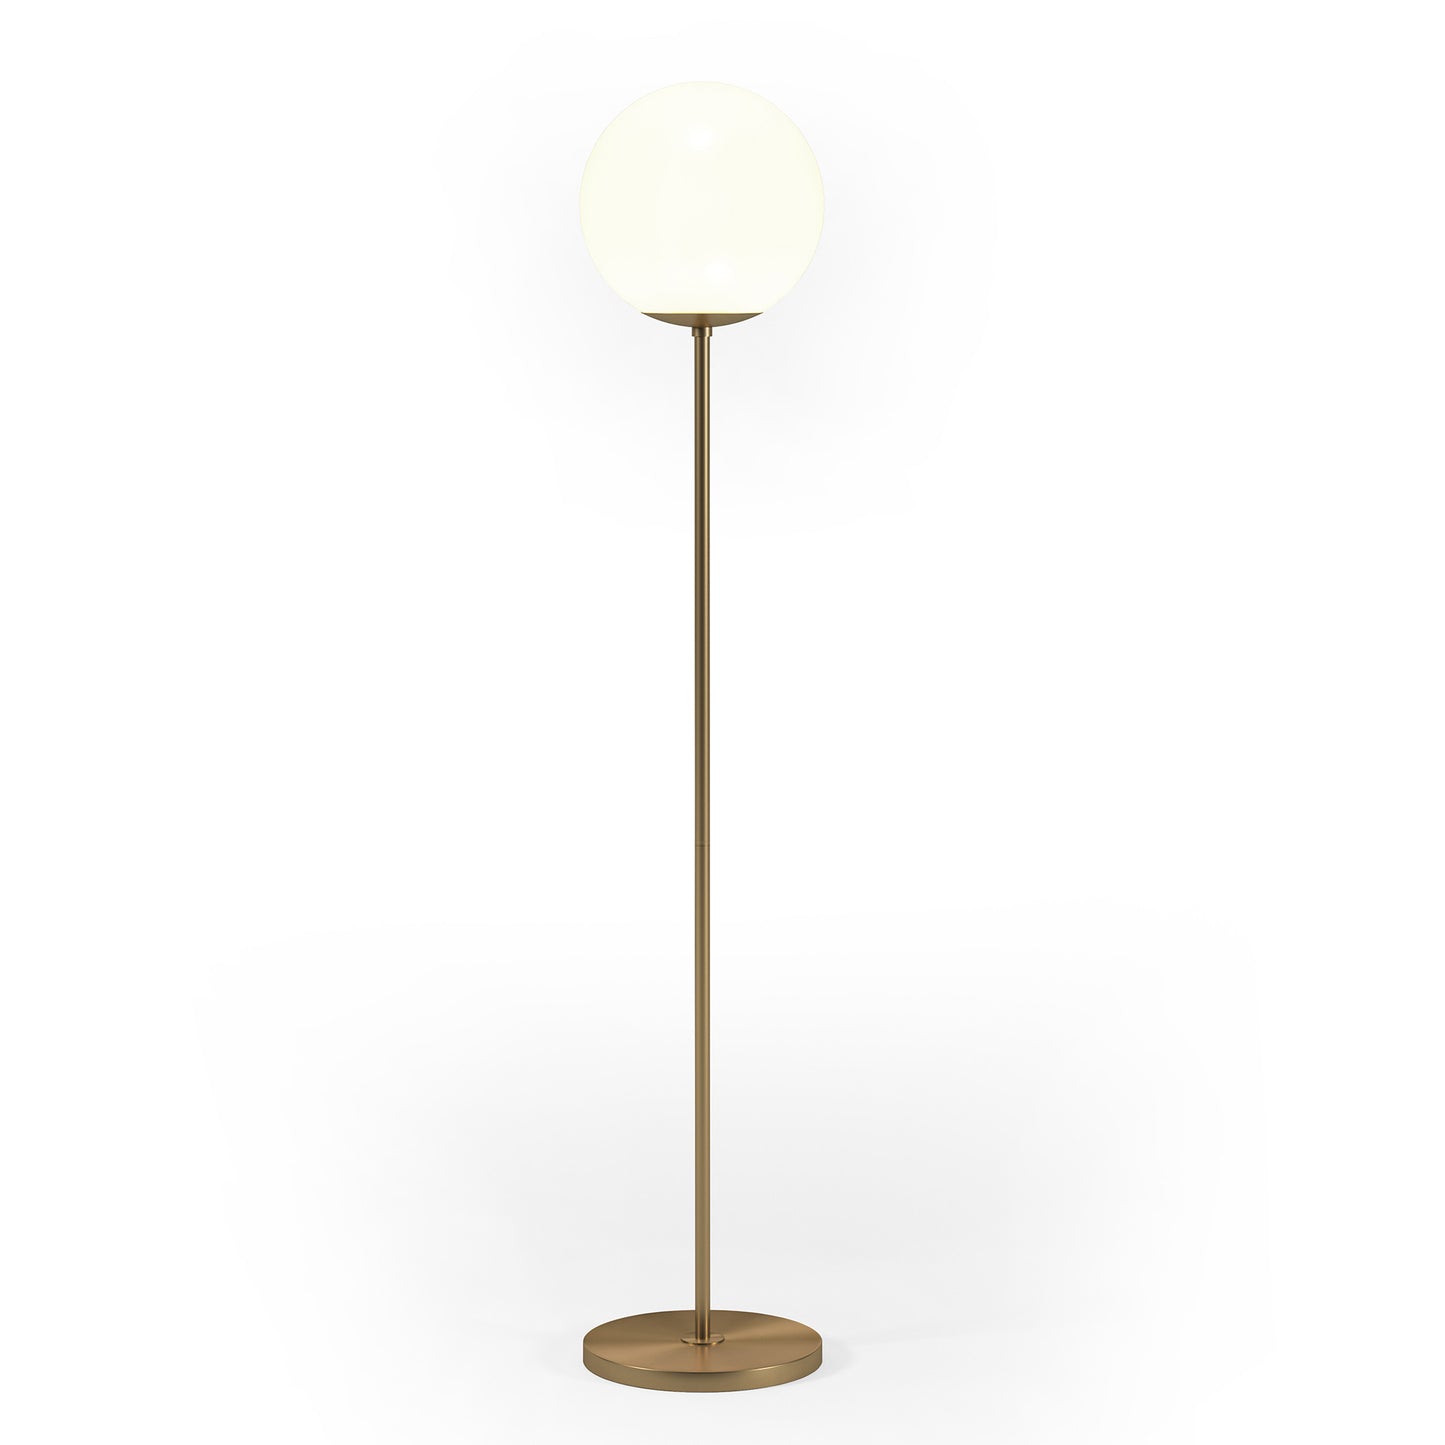 62" Brass Novelty Floor Lamp With White Frosted Glass Globe Shade